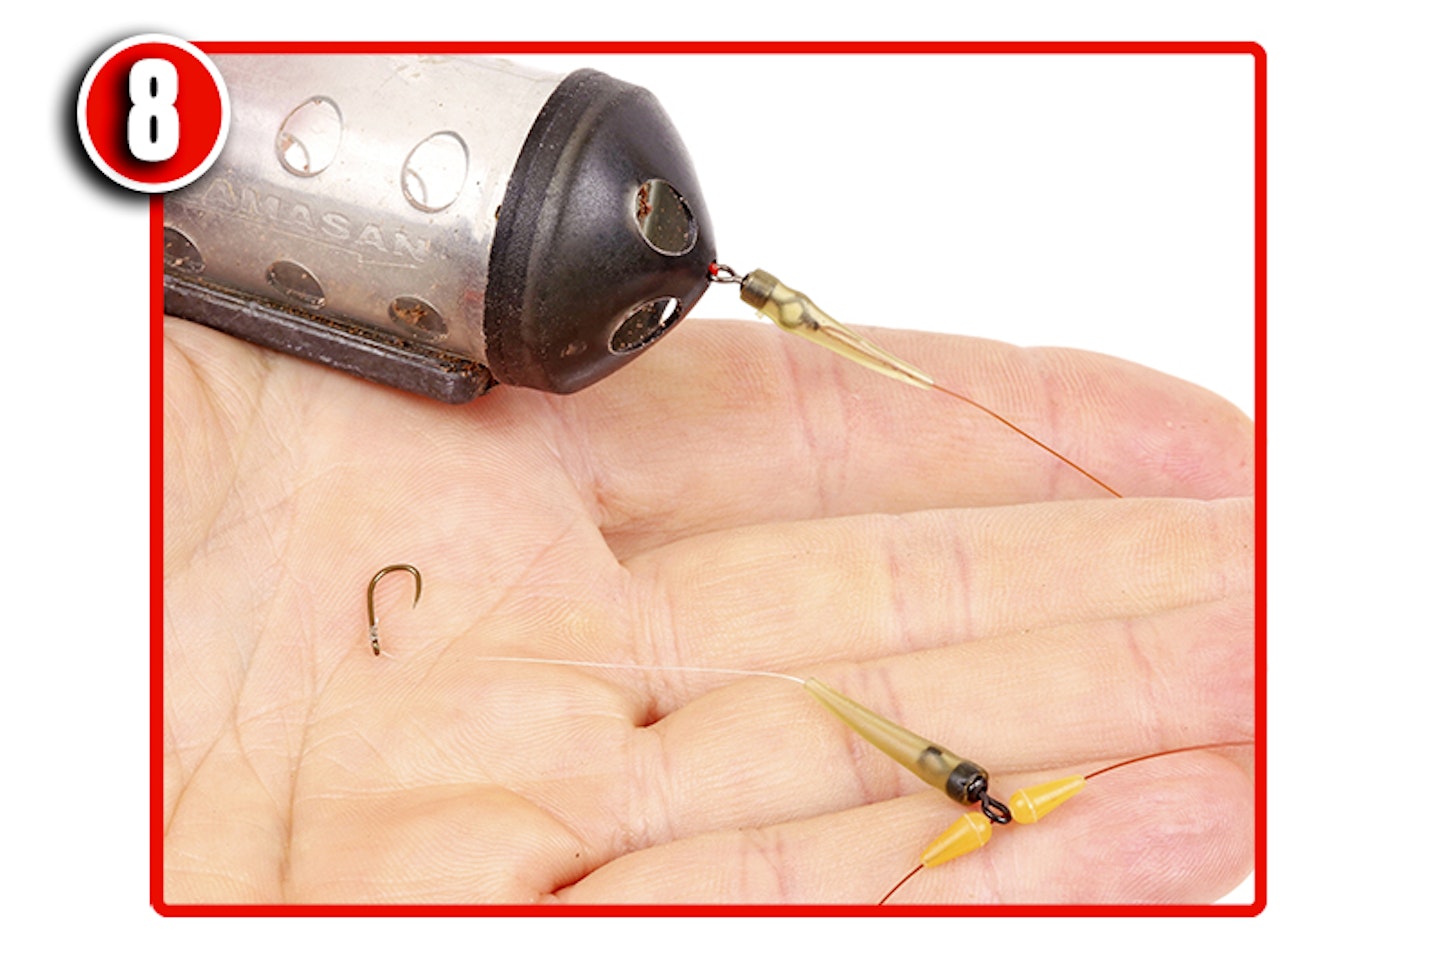 Slide the stops and hooklength into position so that the hook rests just above the feeder